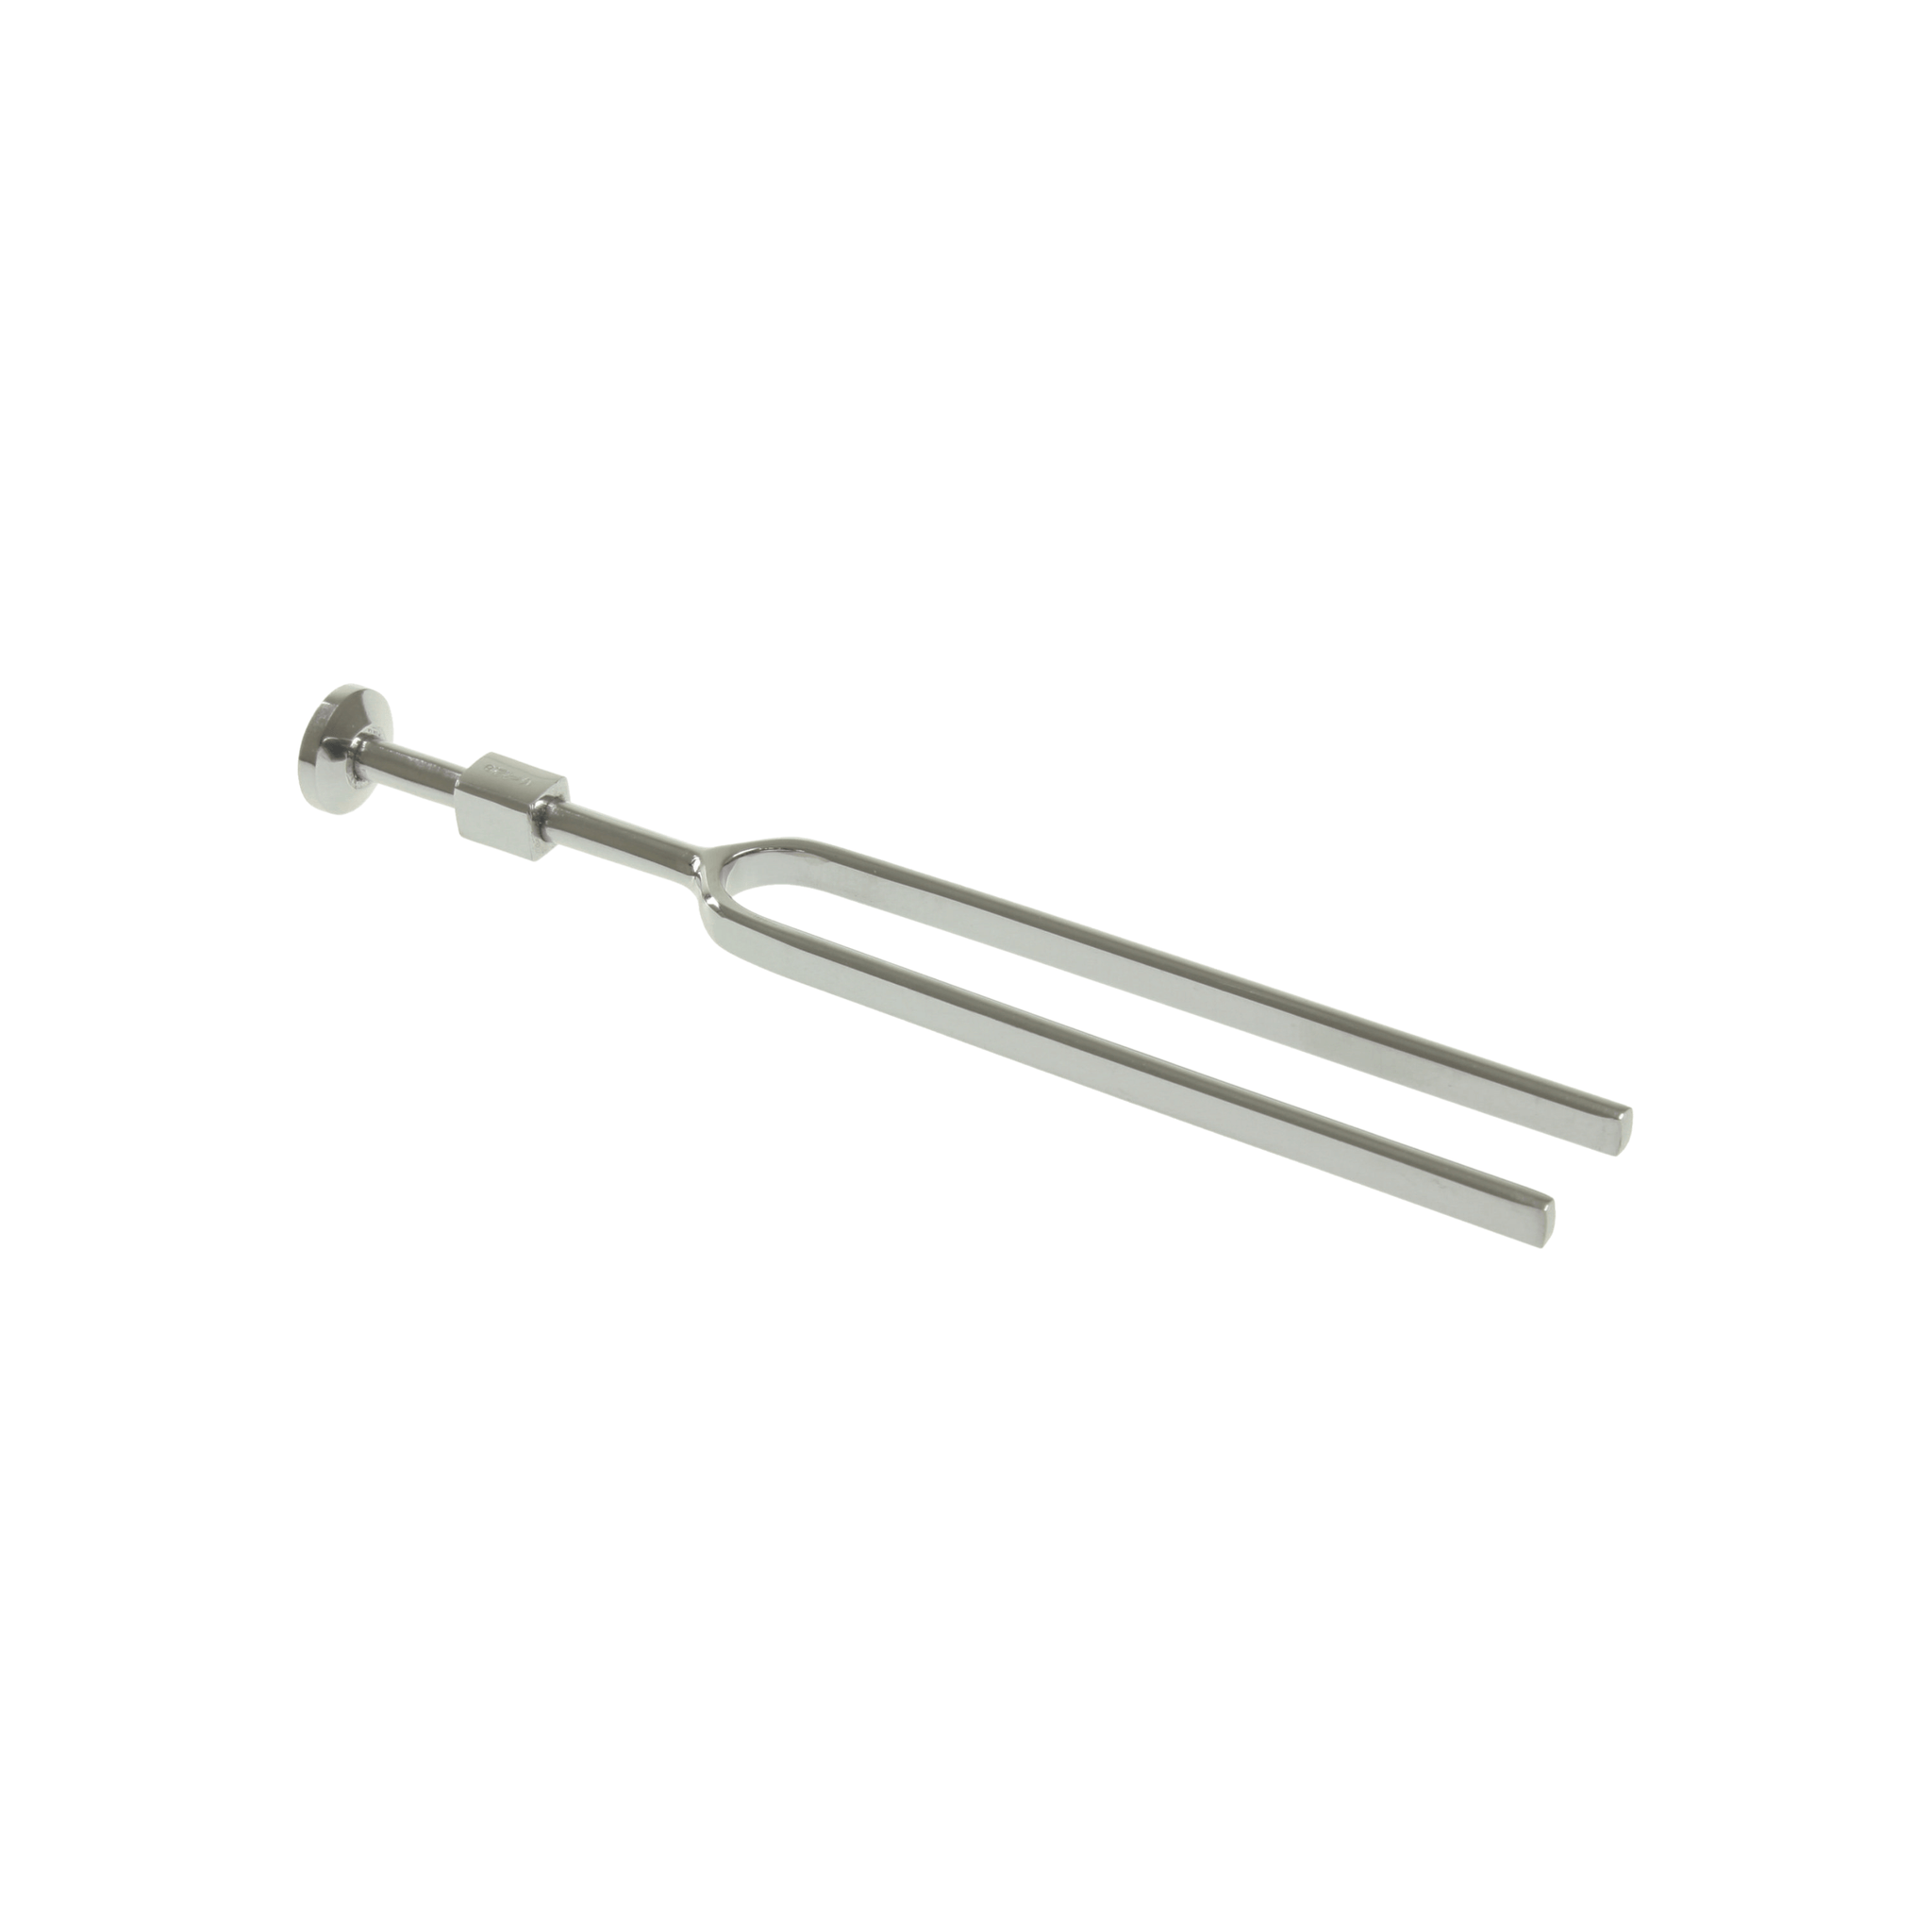 Basic Tuning Fork with Foot- Stainless Steel, C128